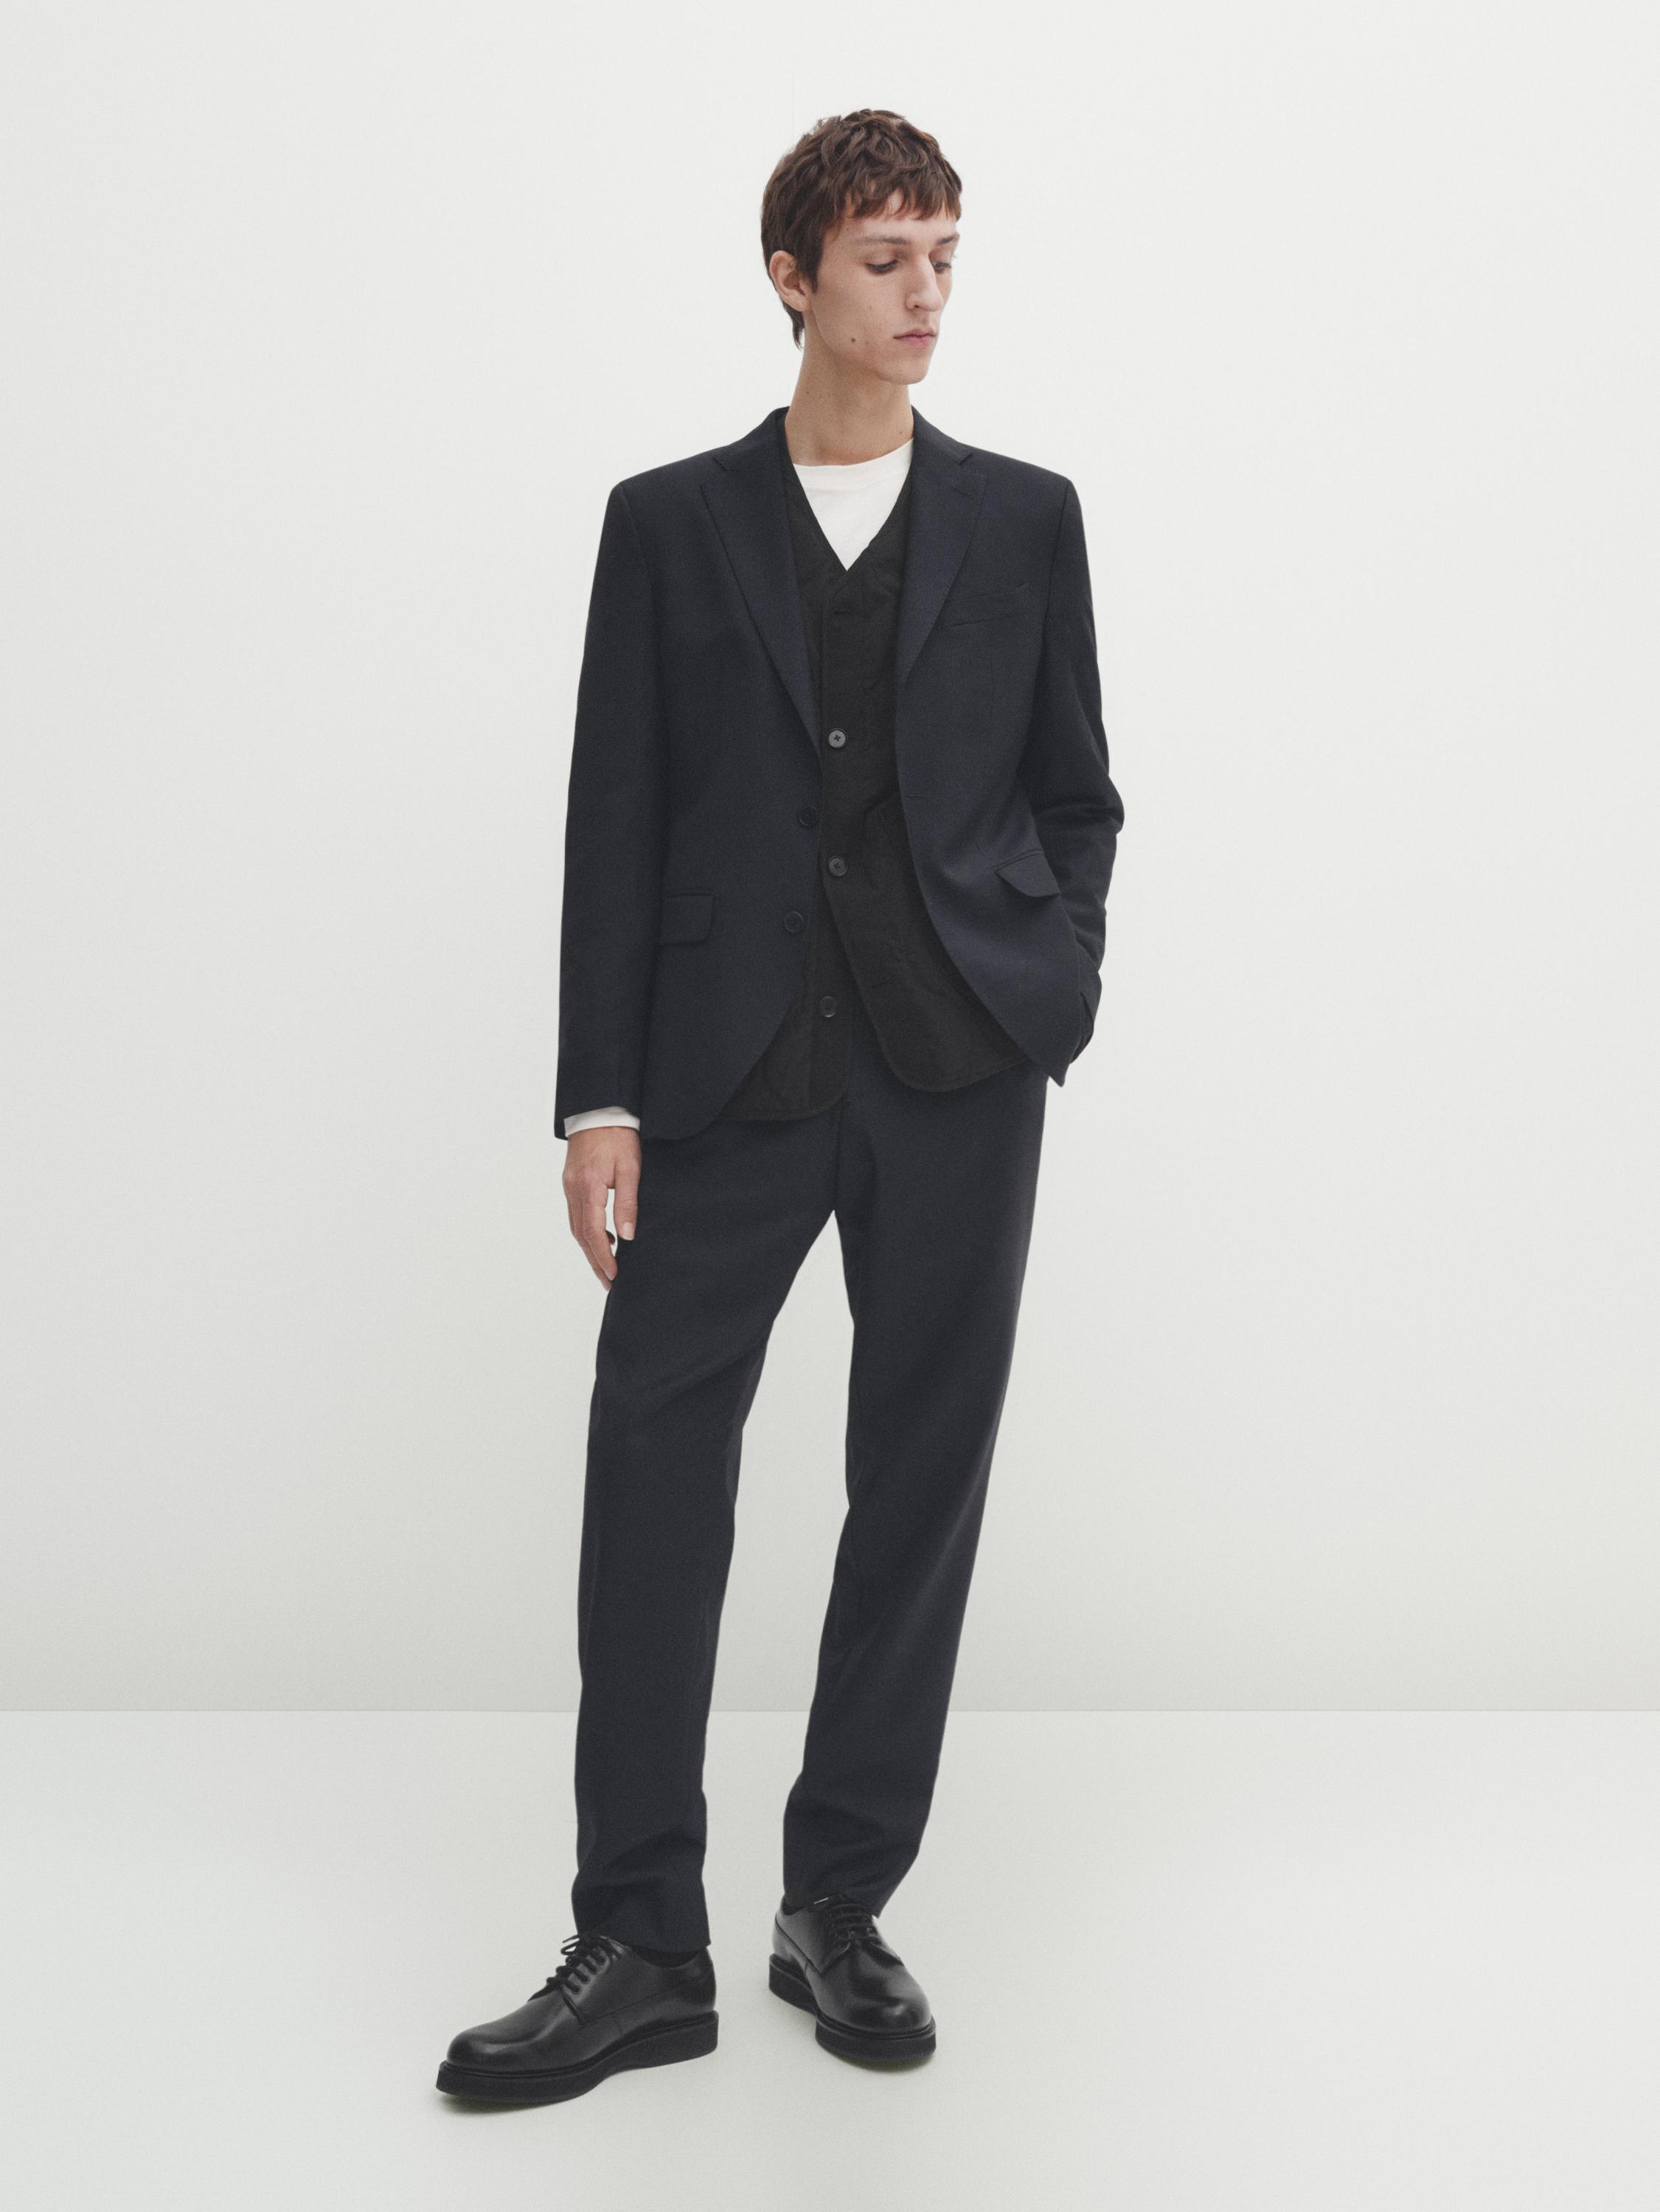 Navy blue check suit trousers - Navy blue | ZARA United States